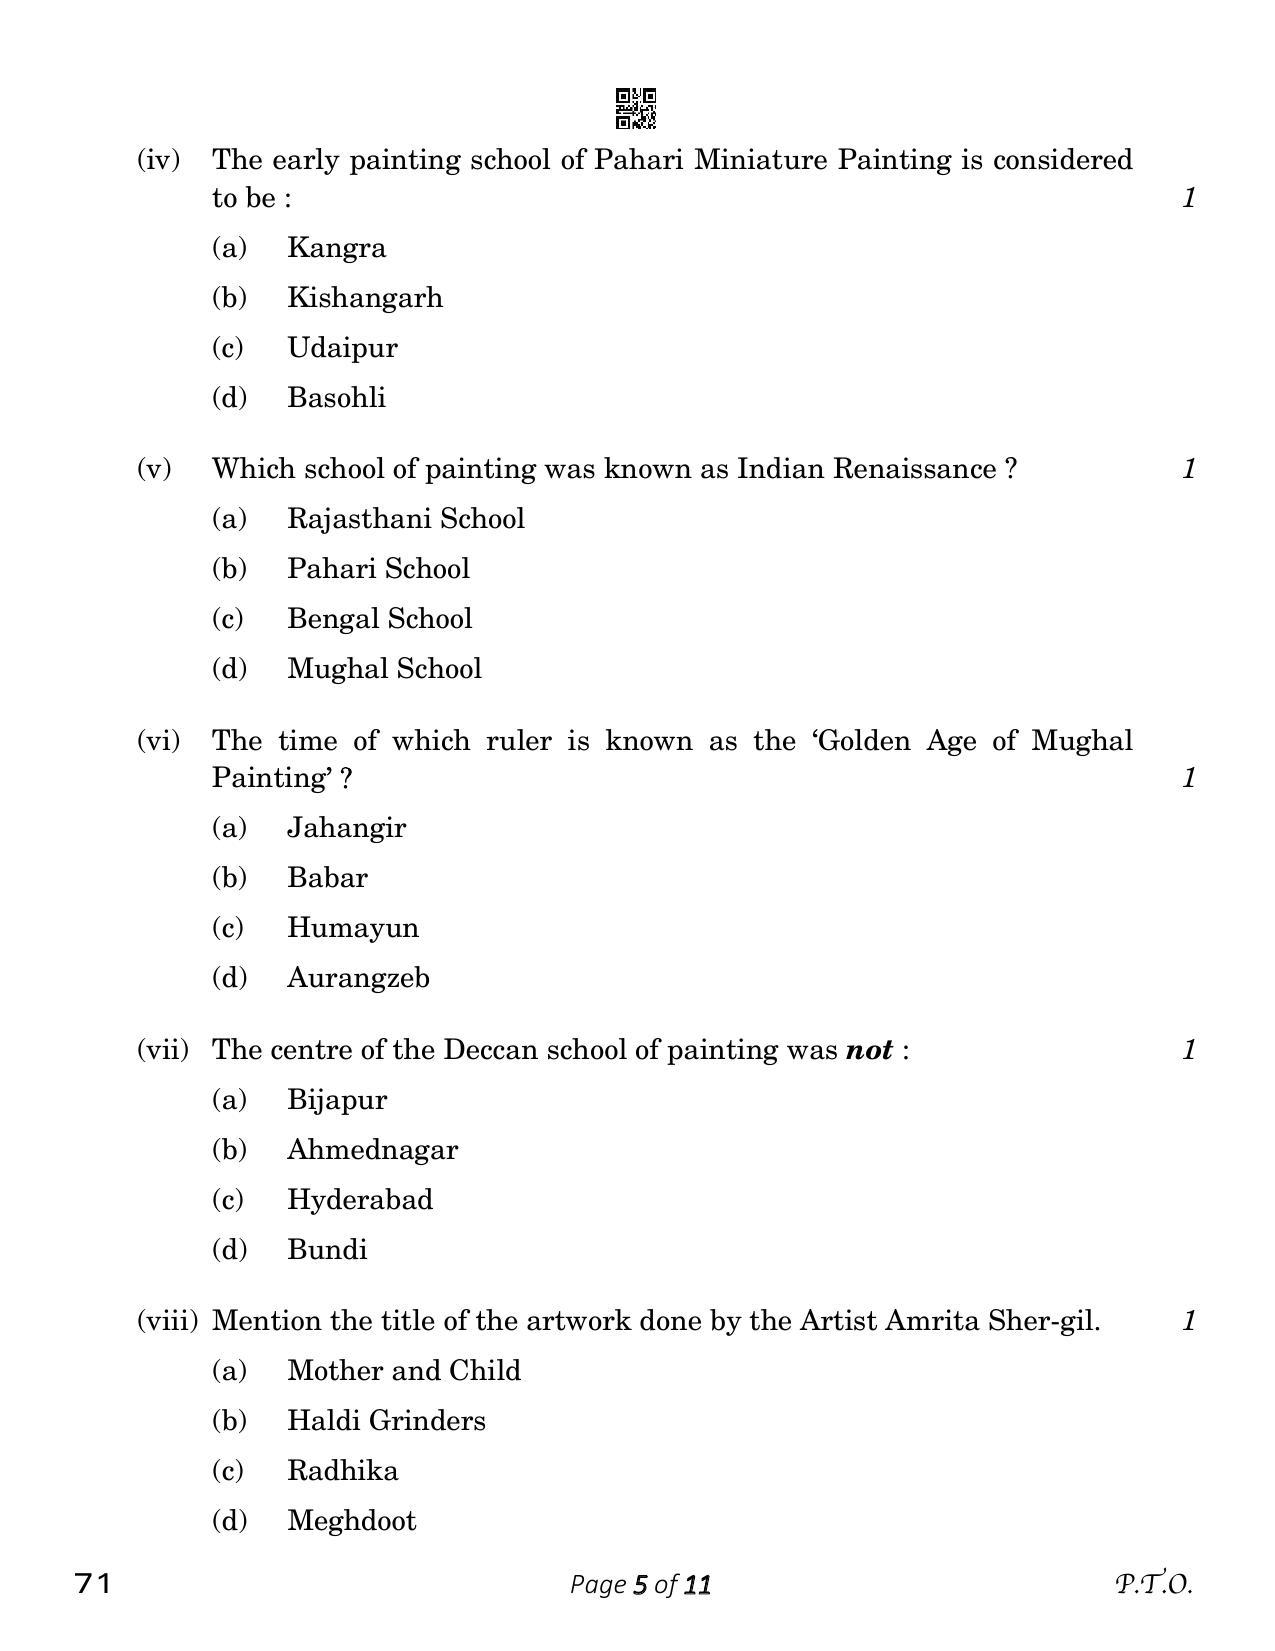 CBSE Class 12 Painting (Compartment) 2023 Question Paper - Page 5